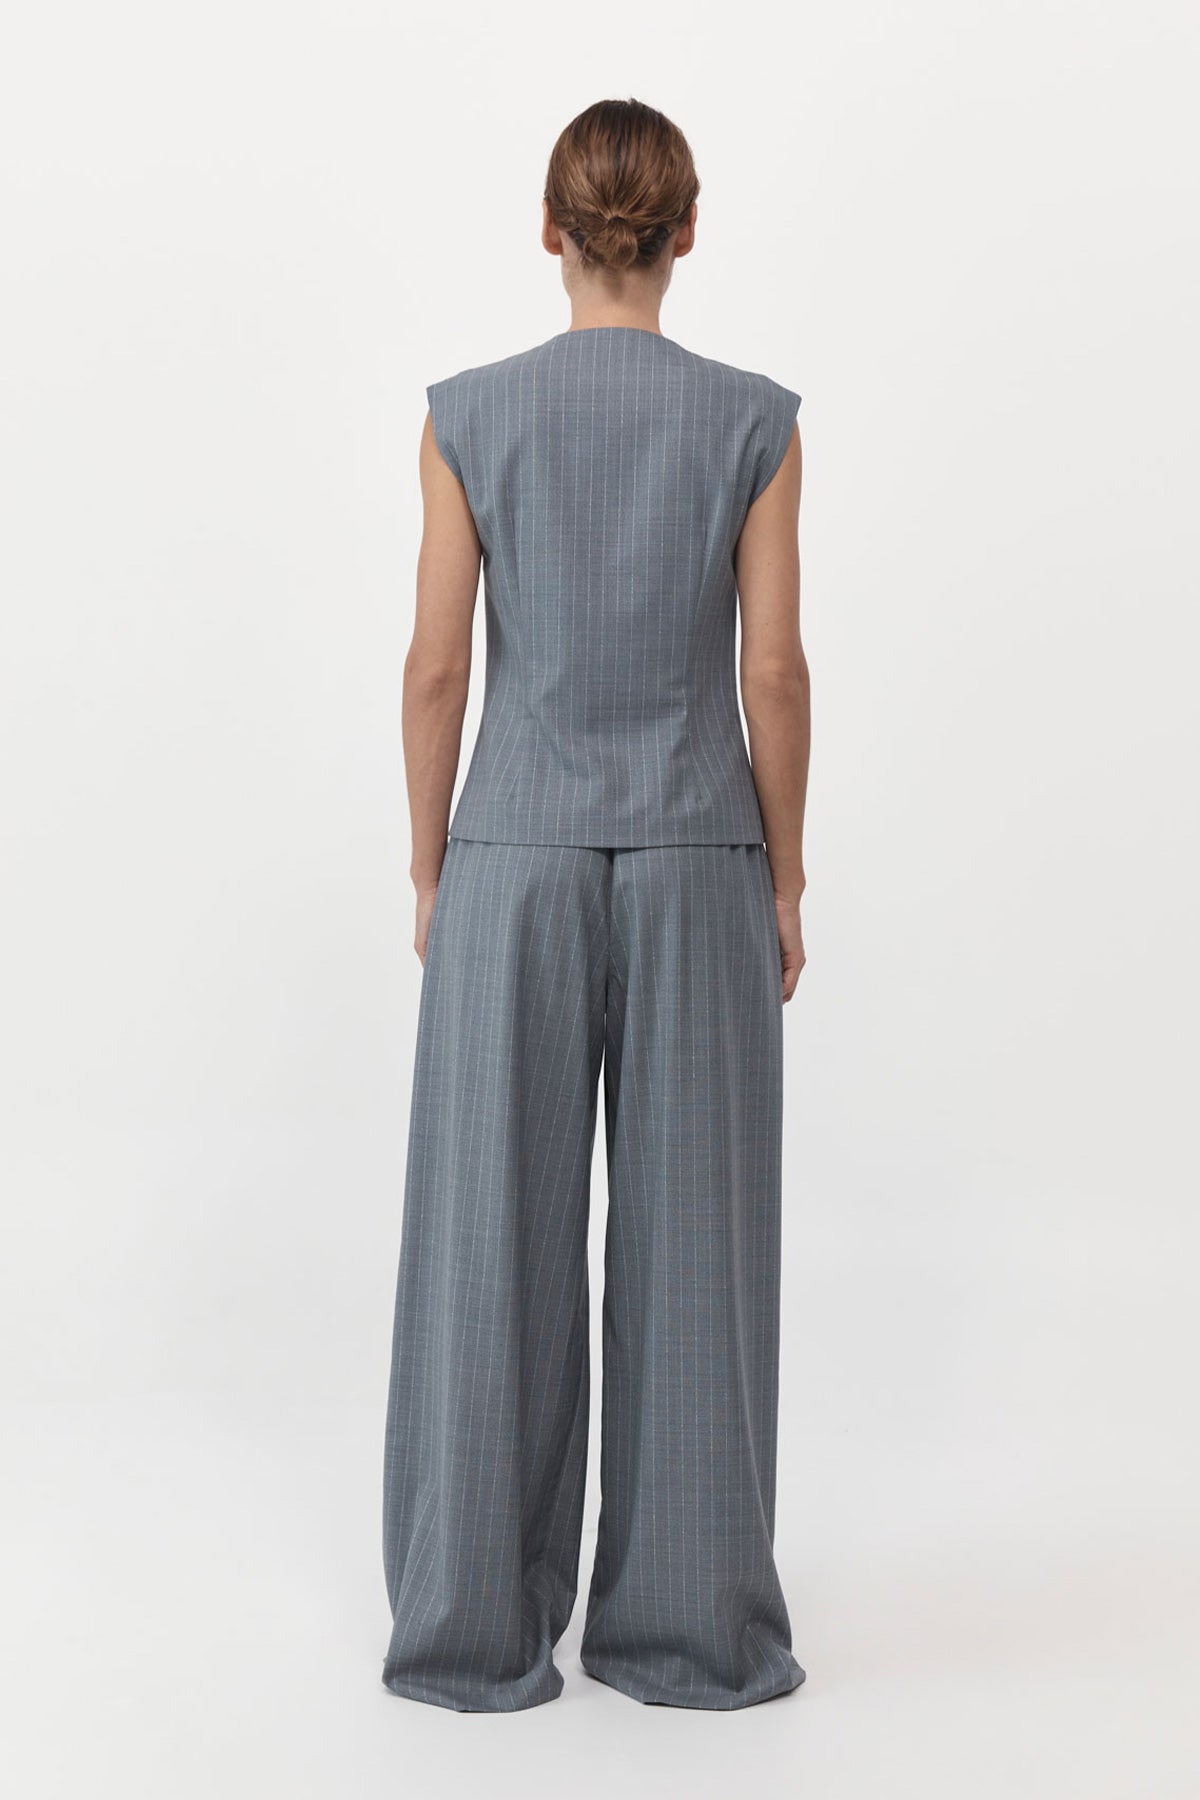 St Agni Wool Vest in Chalk Stripe available at TNT The New Trend Australia